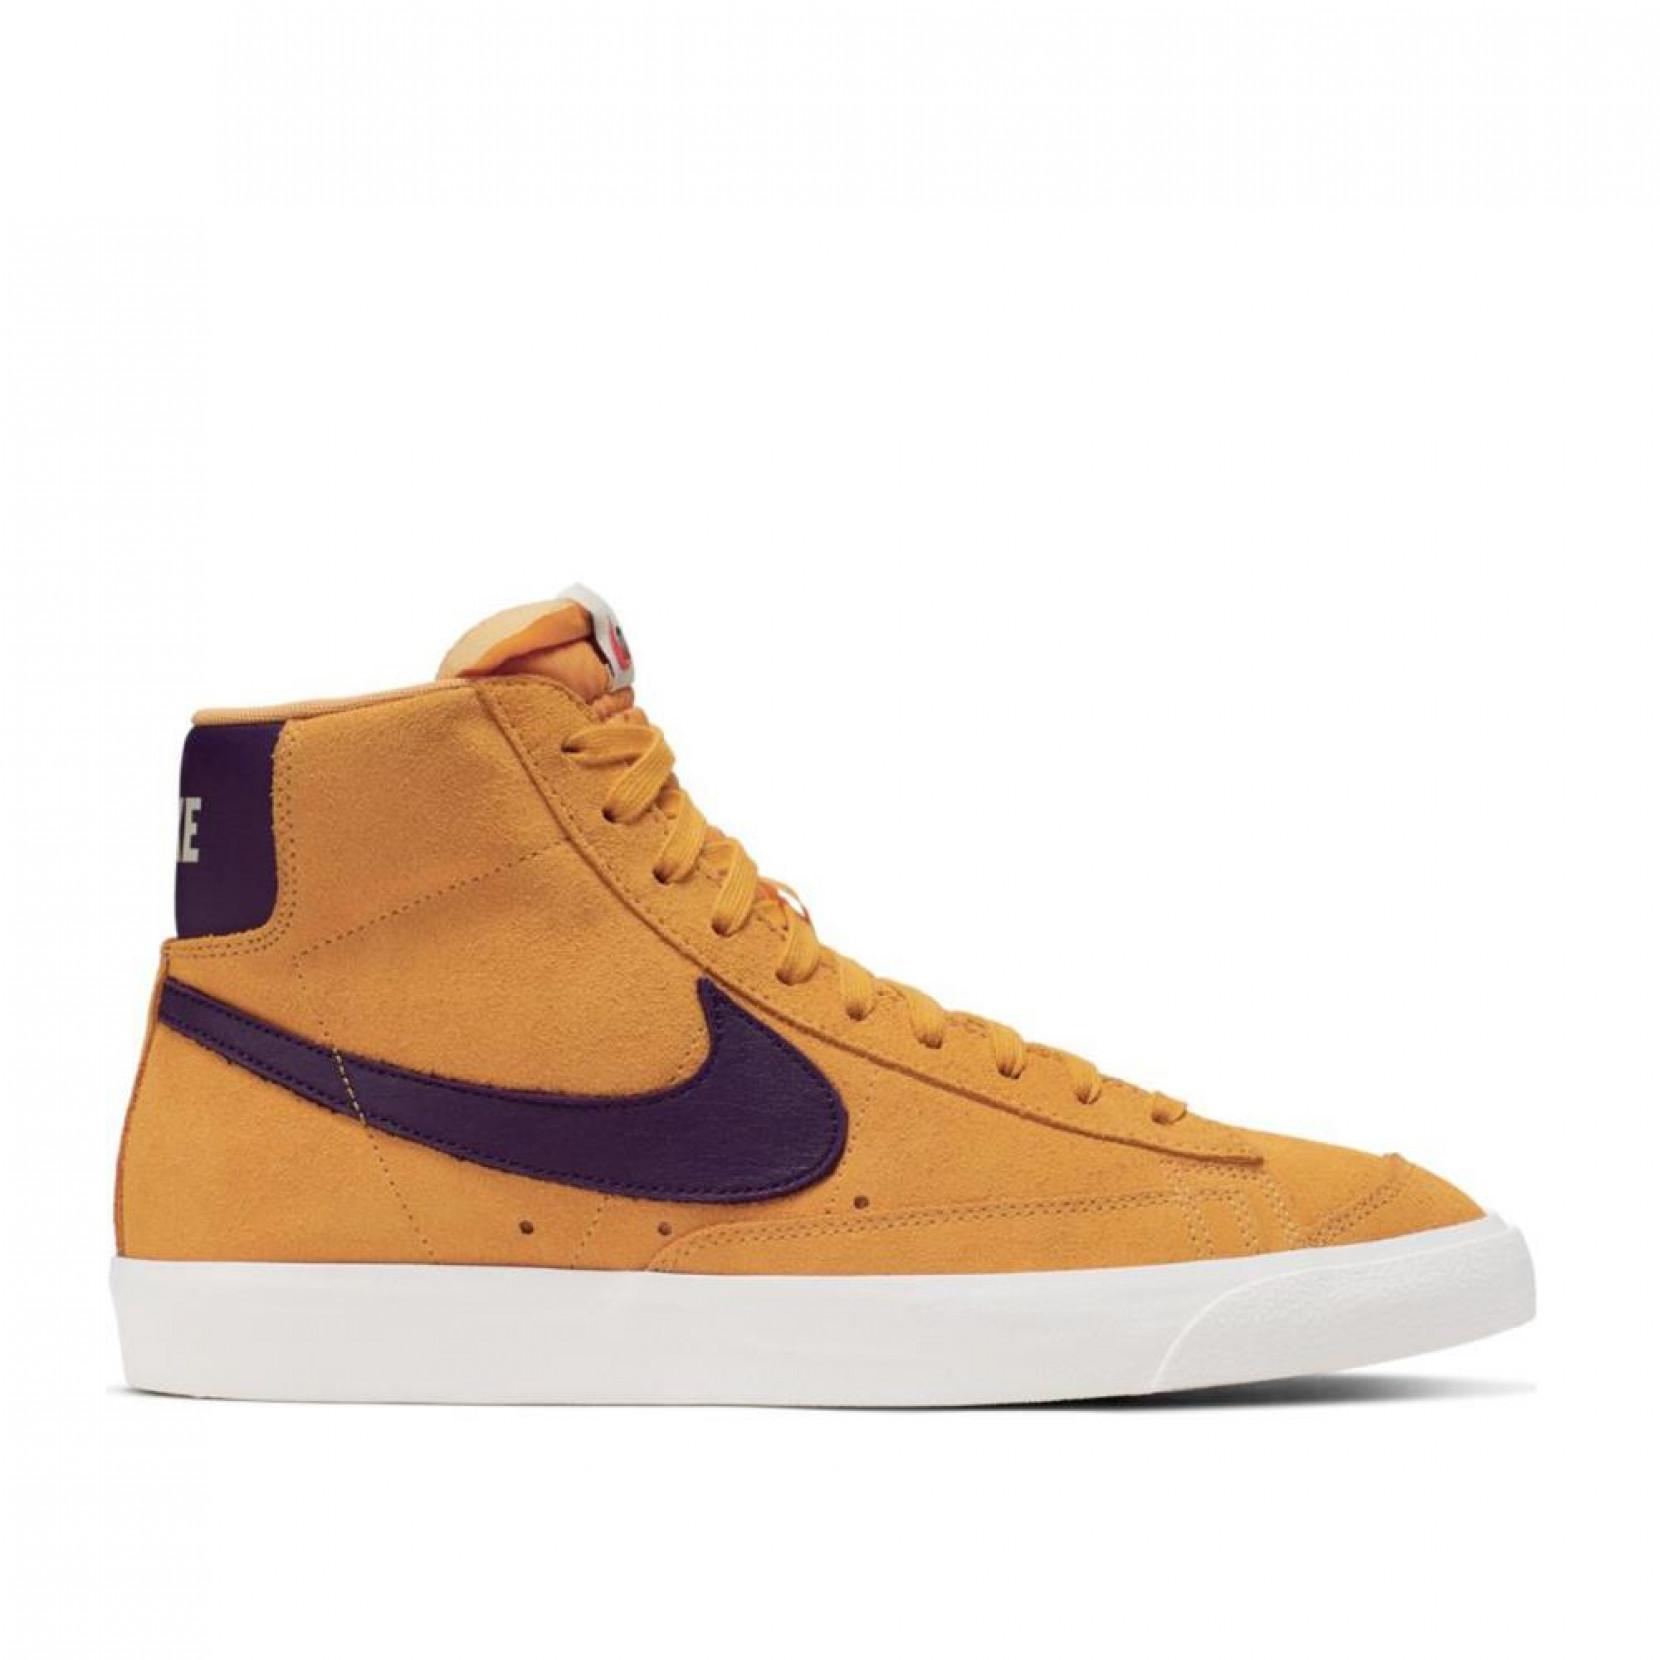 Nike Suede Nike Blazer Mid '77 Vintage in Yellow for Men - Lyst